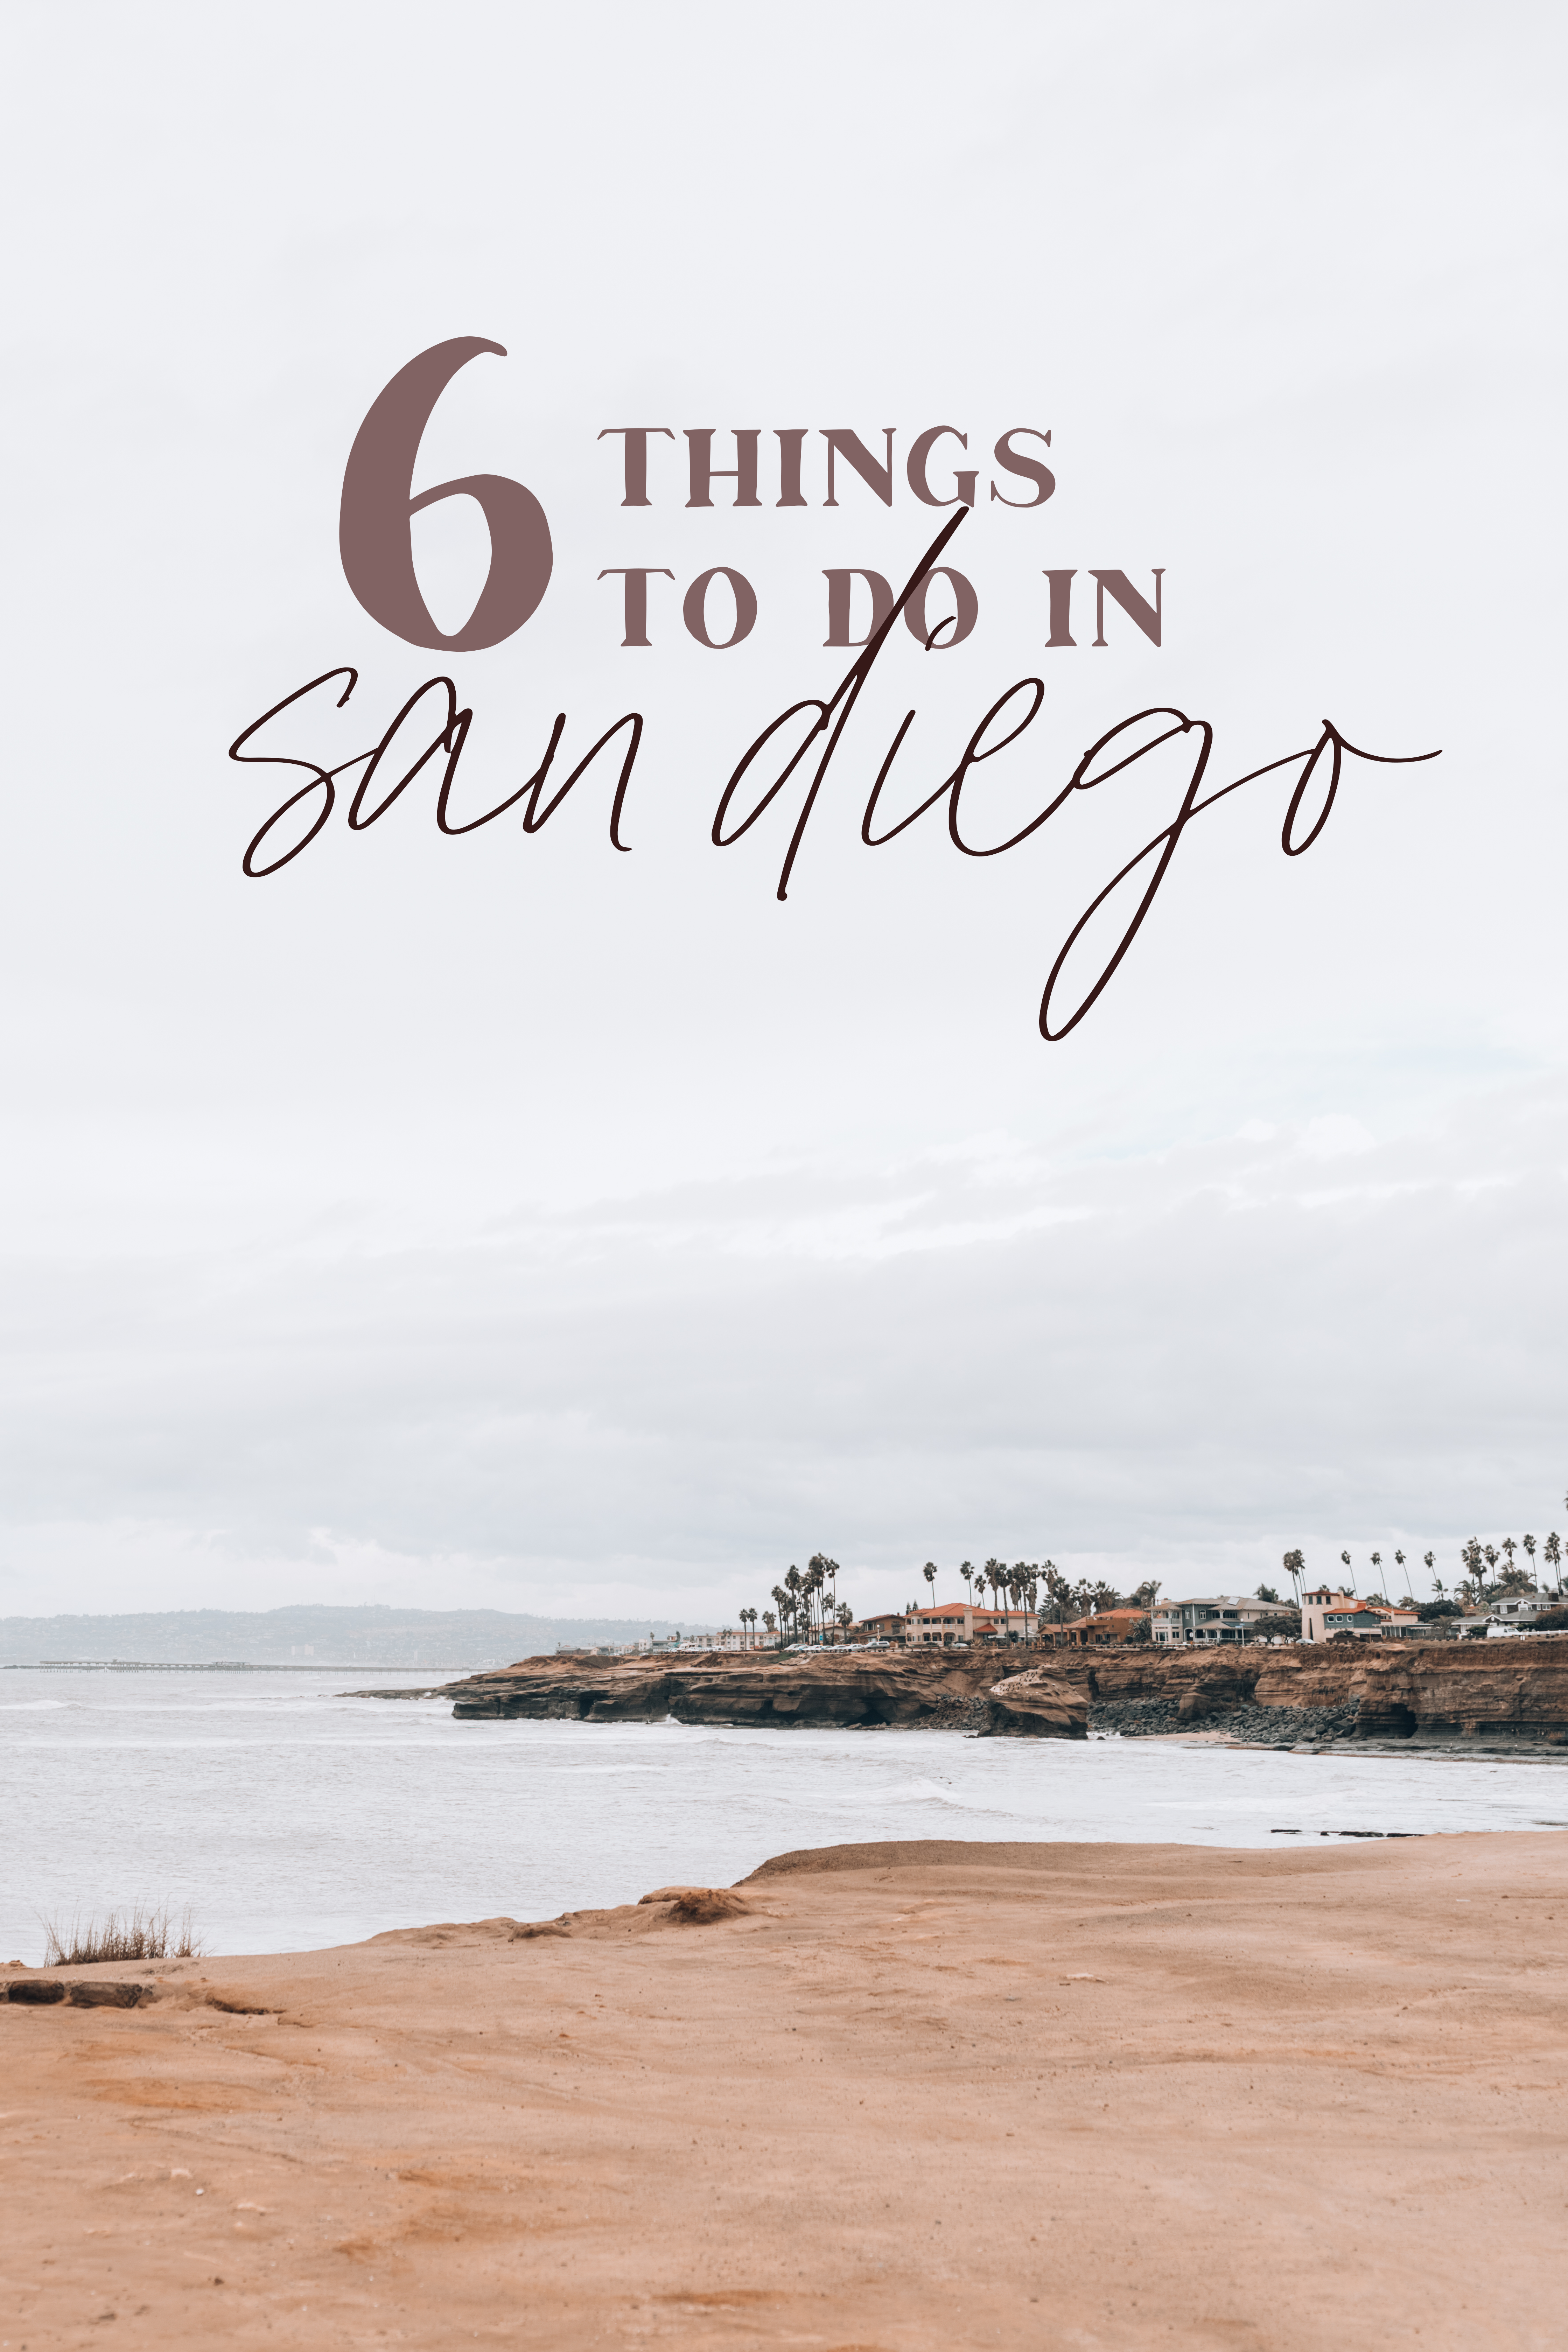 6 things to do in San Diego